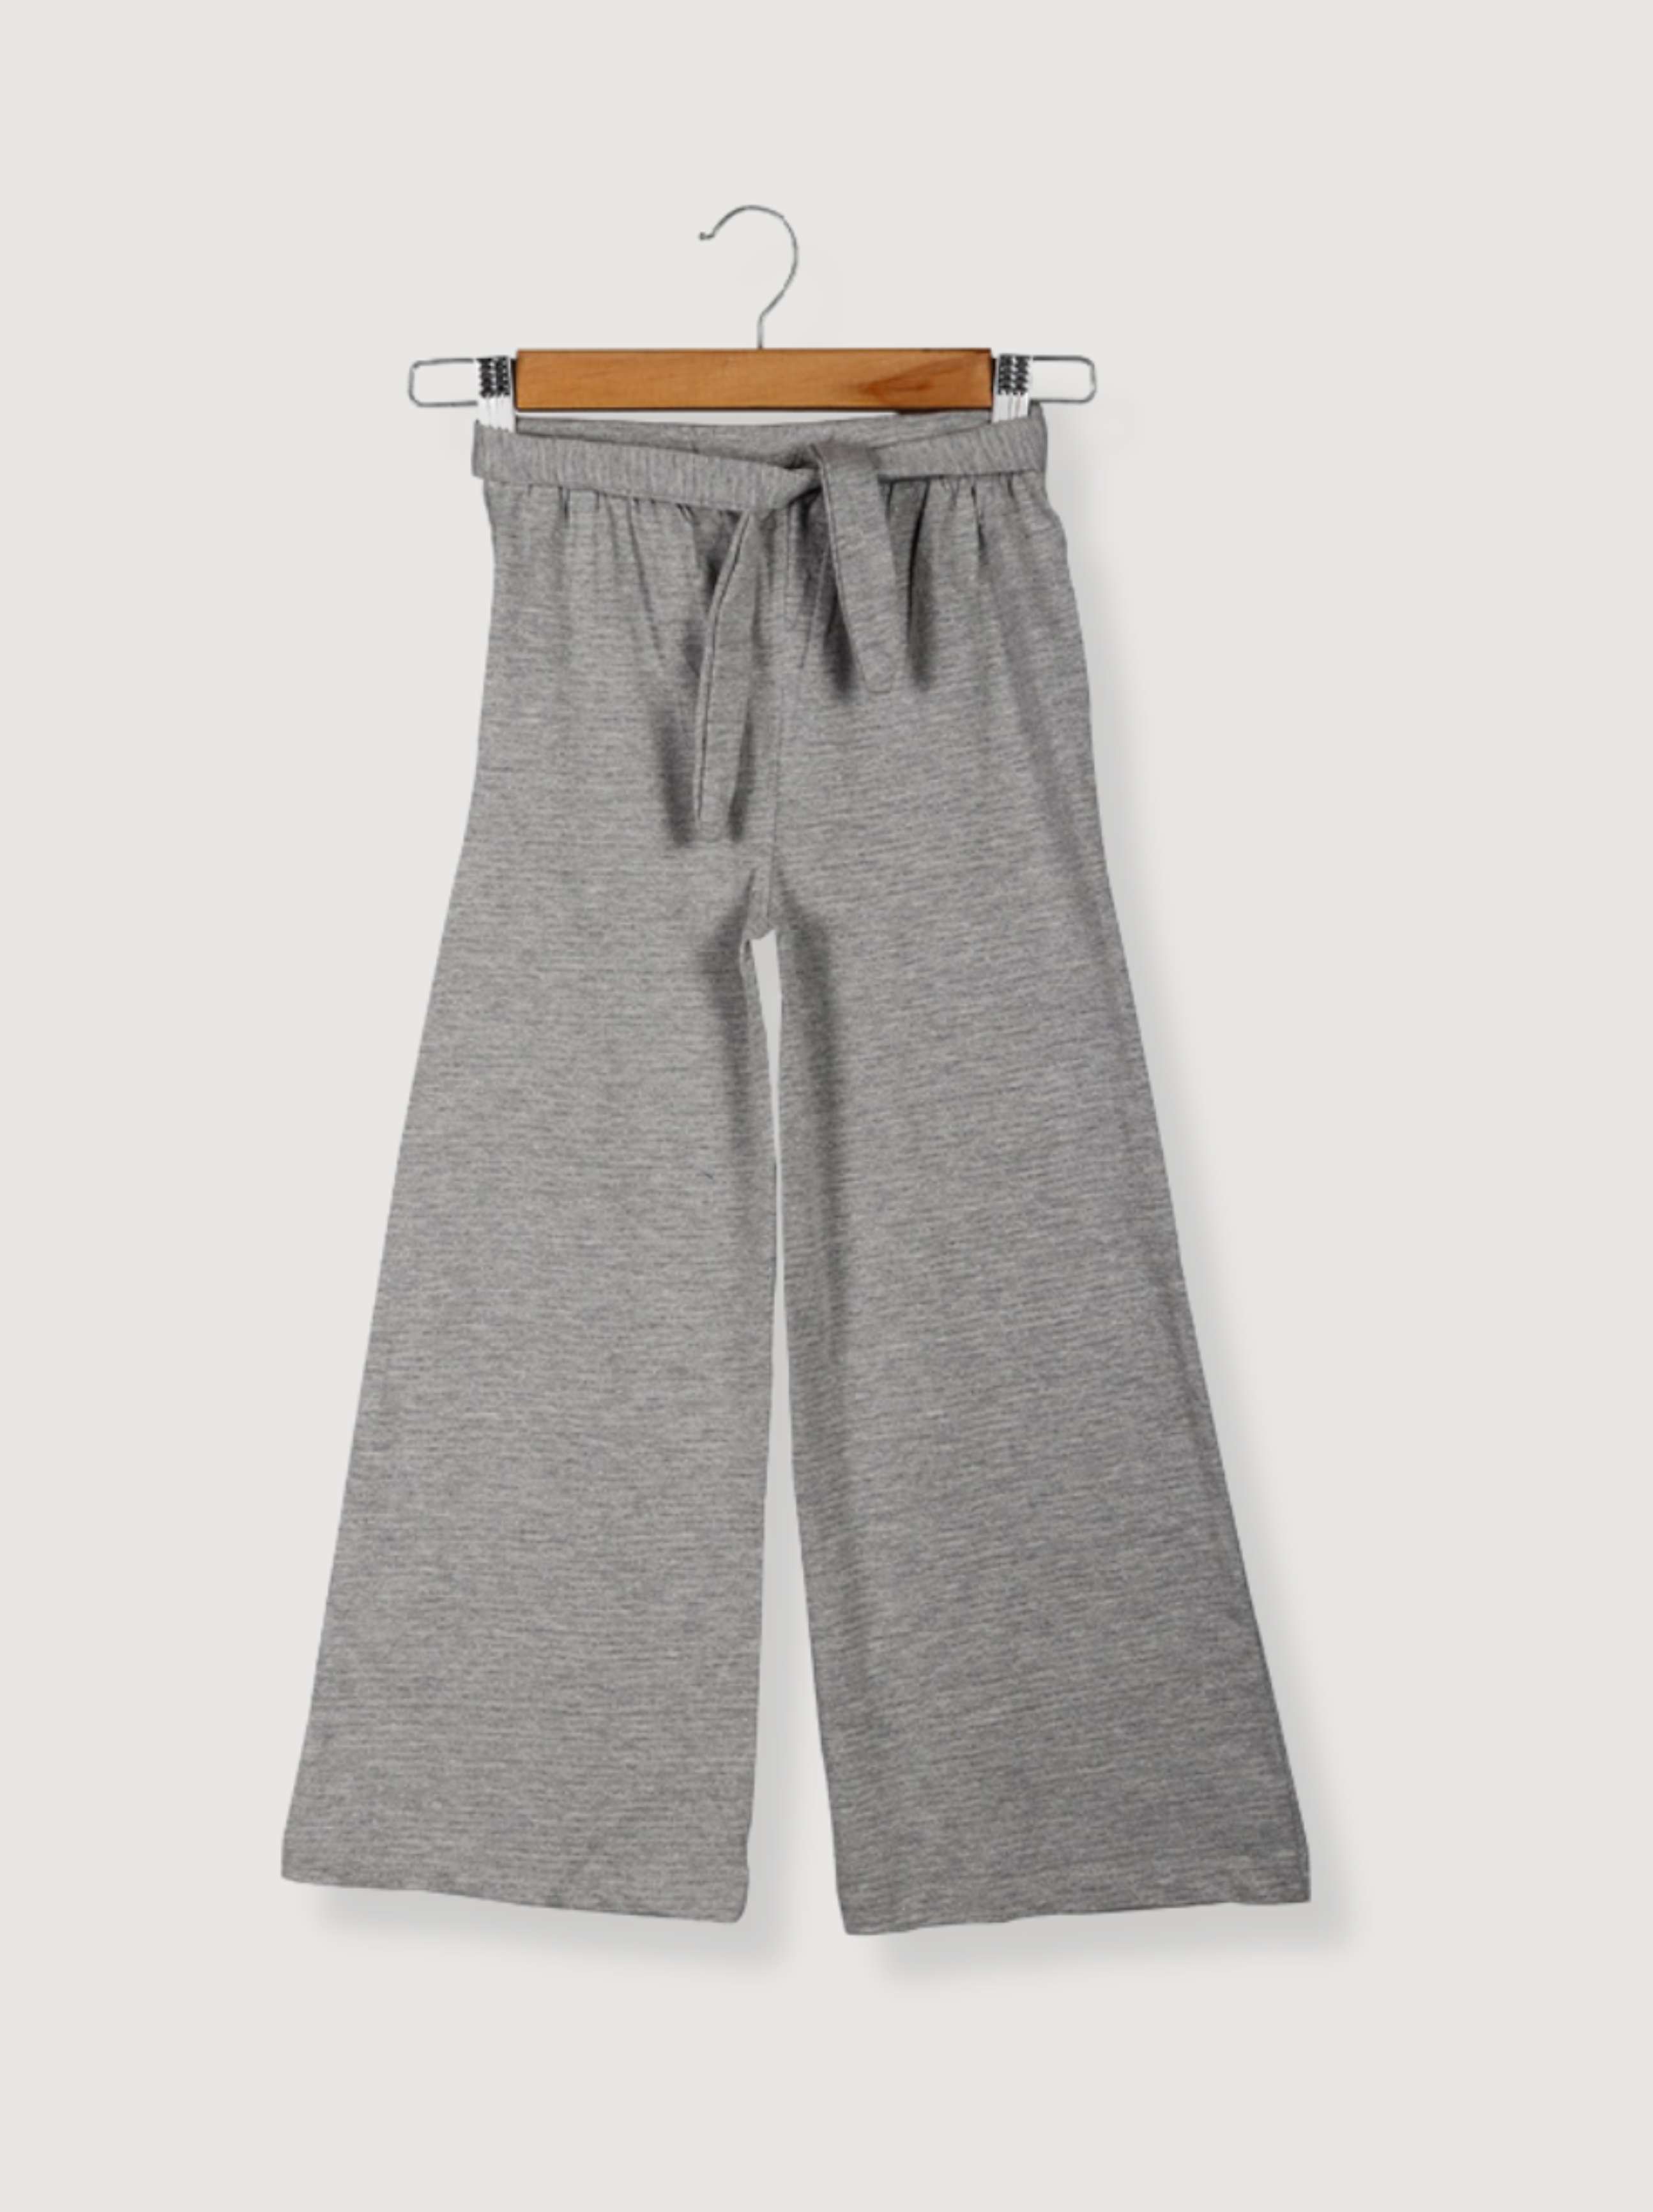 Kids Grey Cotton jersey knit Solid Pant